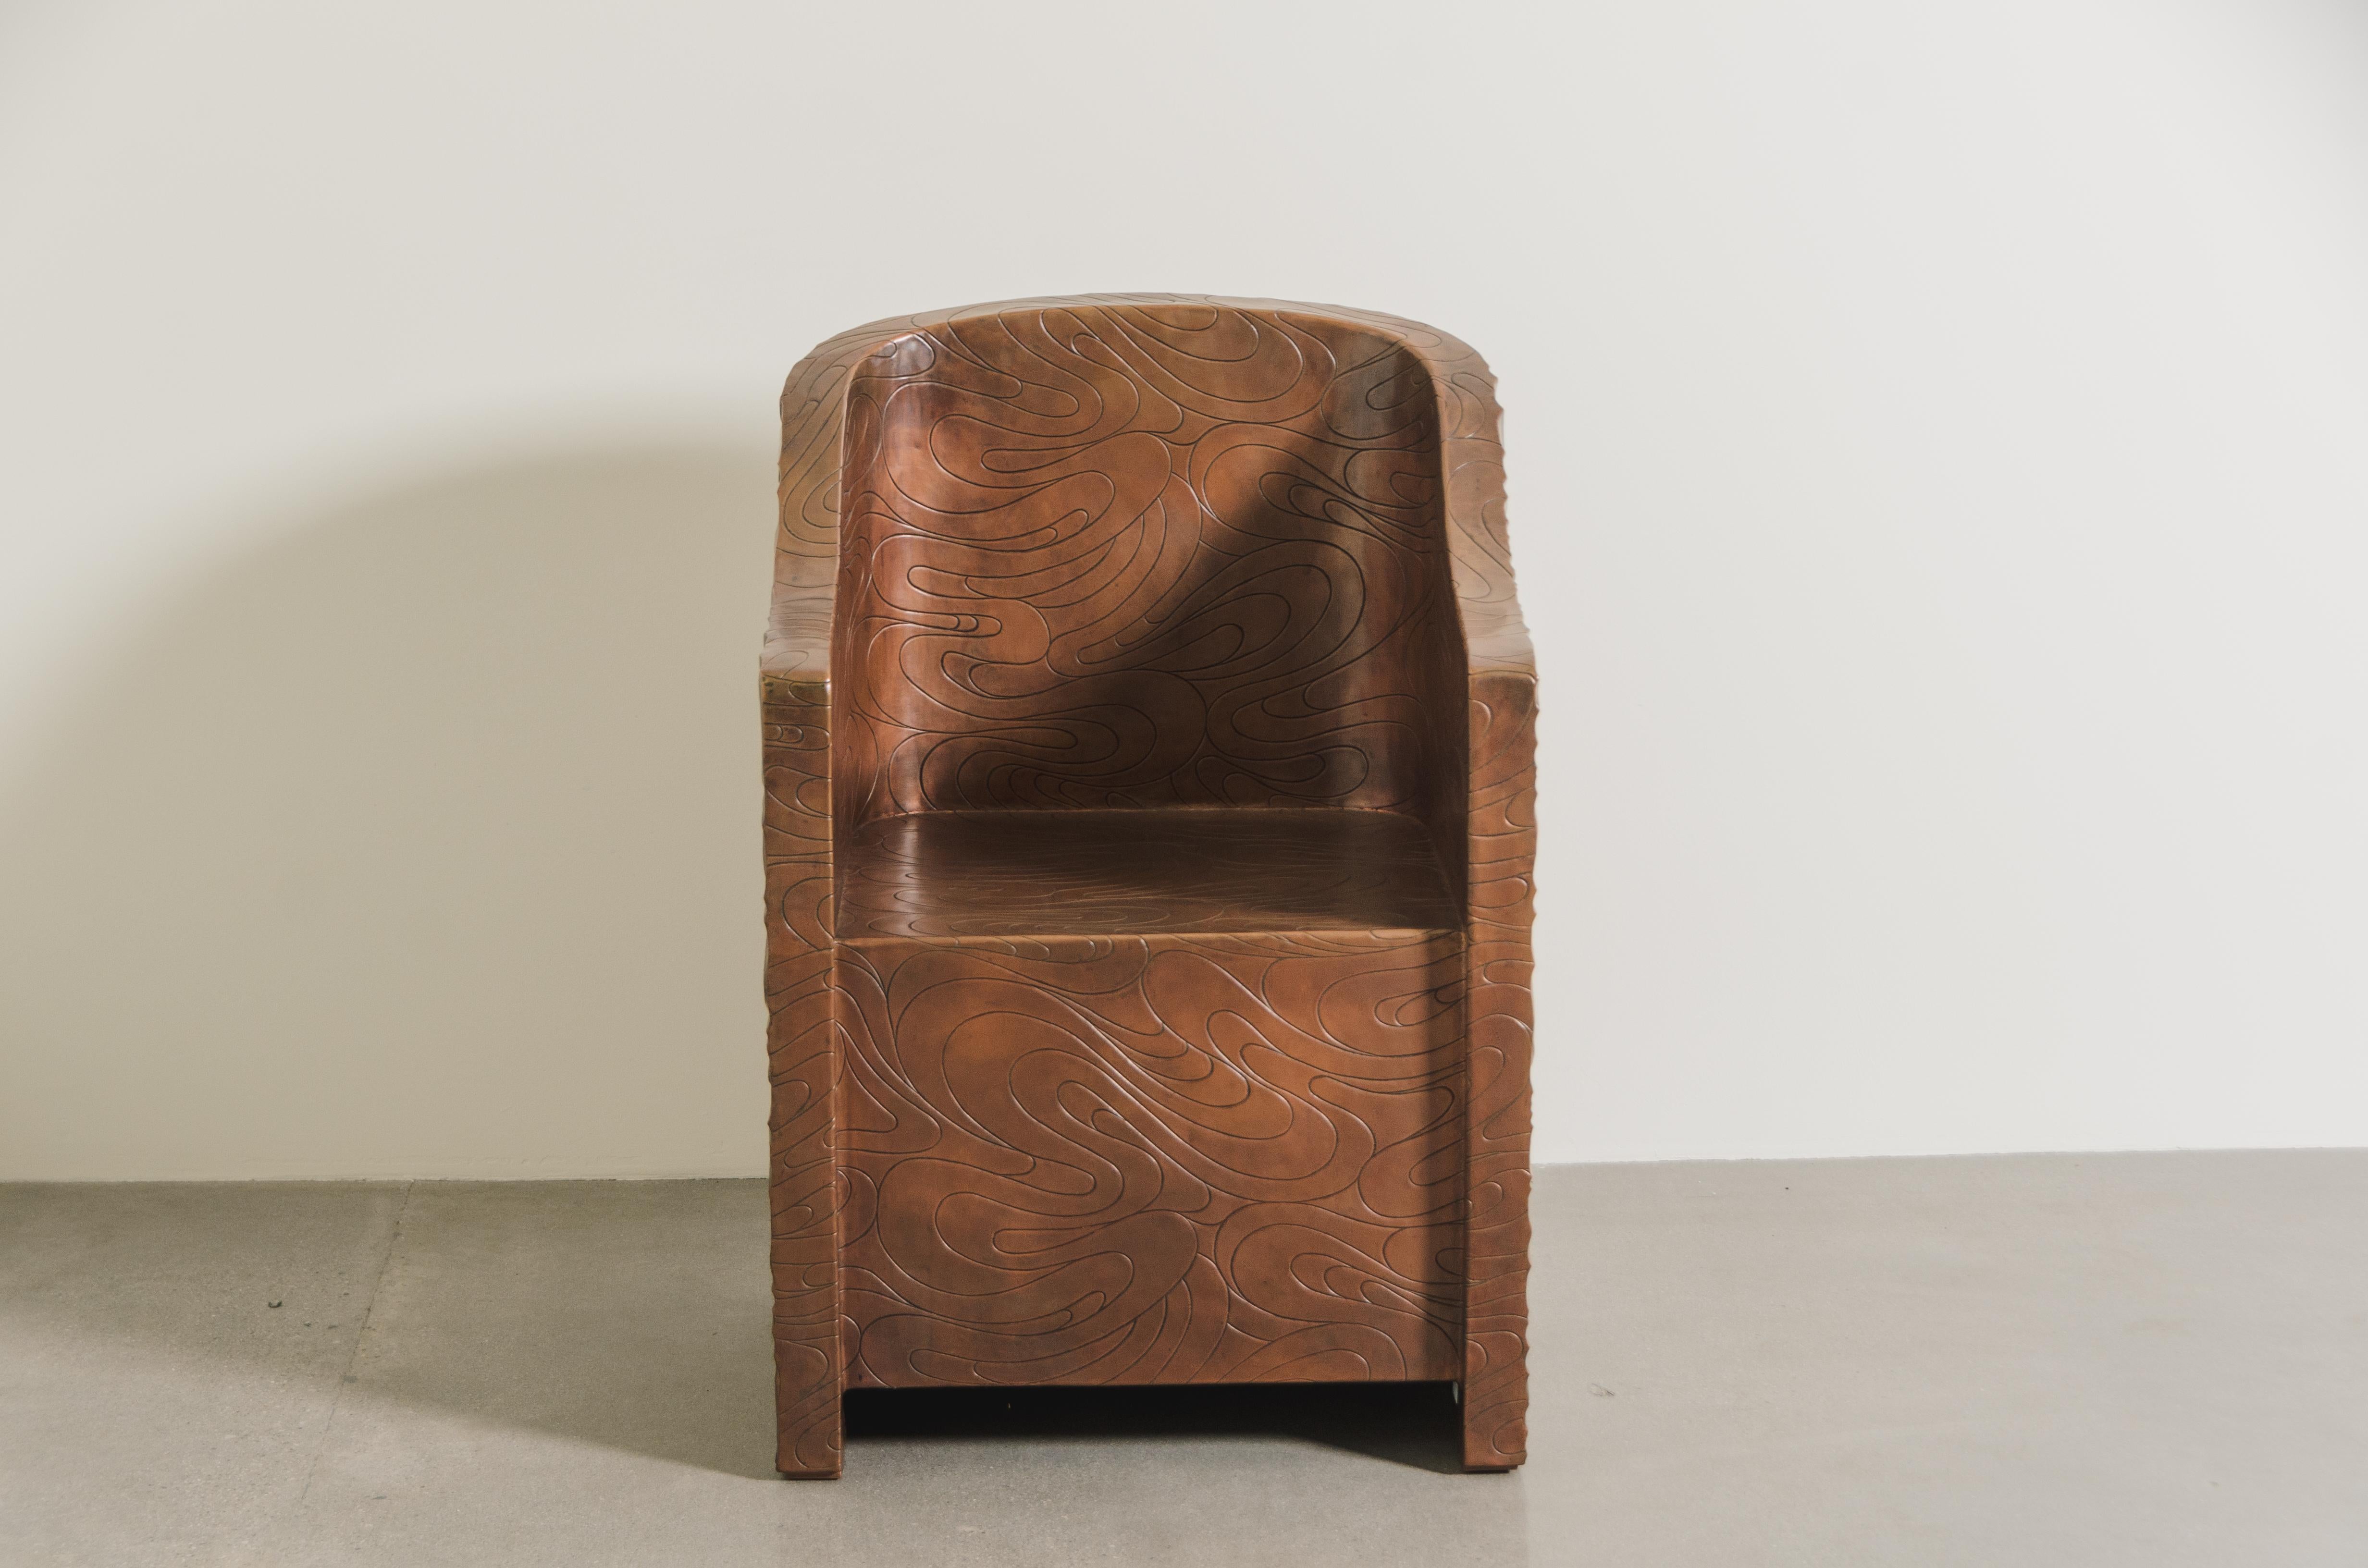 Modern Contemporary Fei Tian Wen Chair in Repoussé Copper by Robert Kuo For Sale